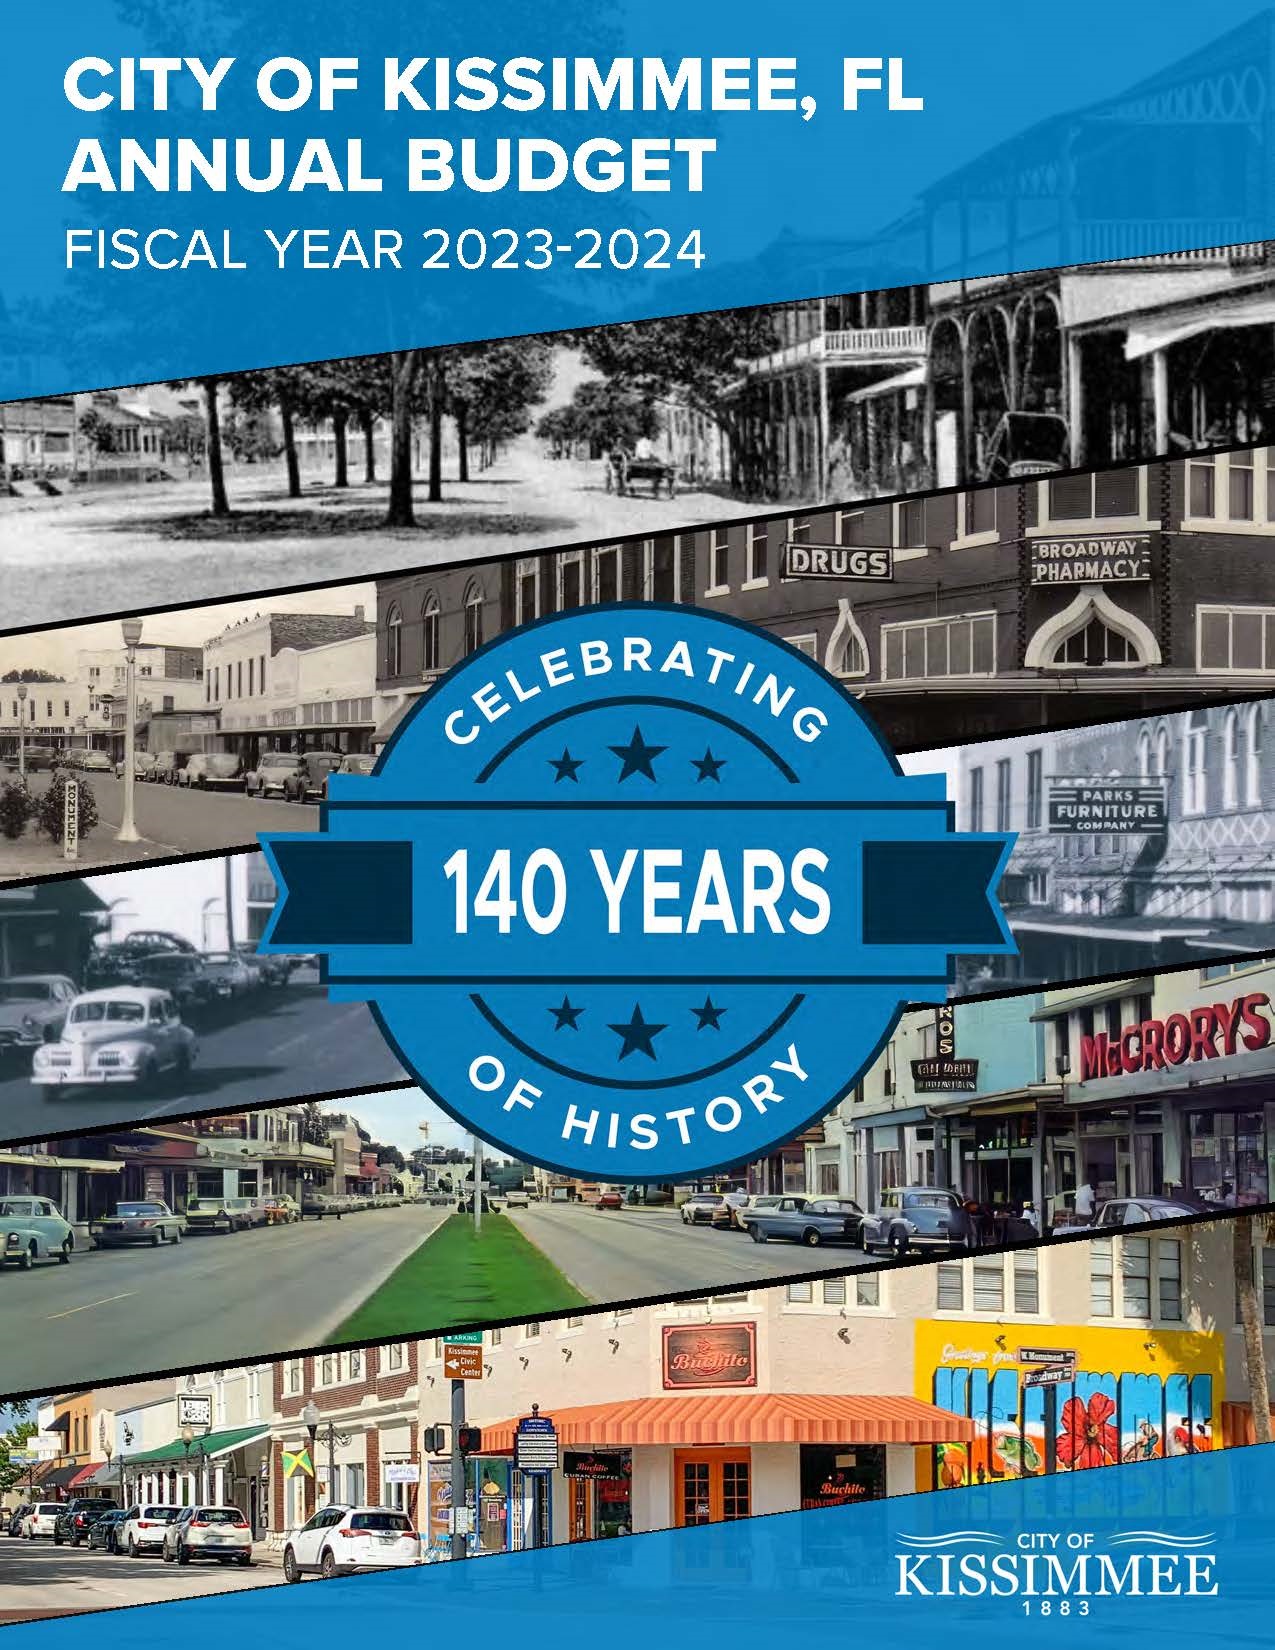 This is the 2024 Budget Book Cover for the City of Kissimmee